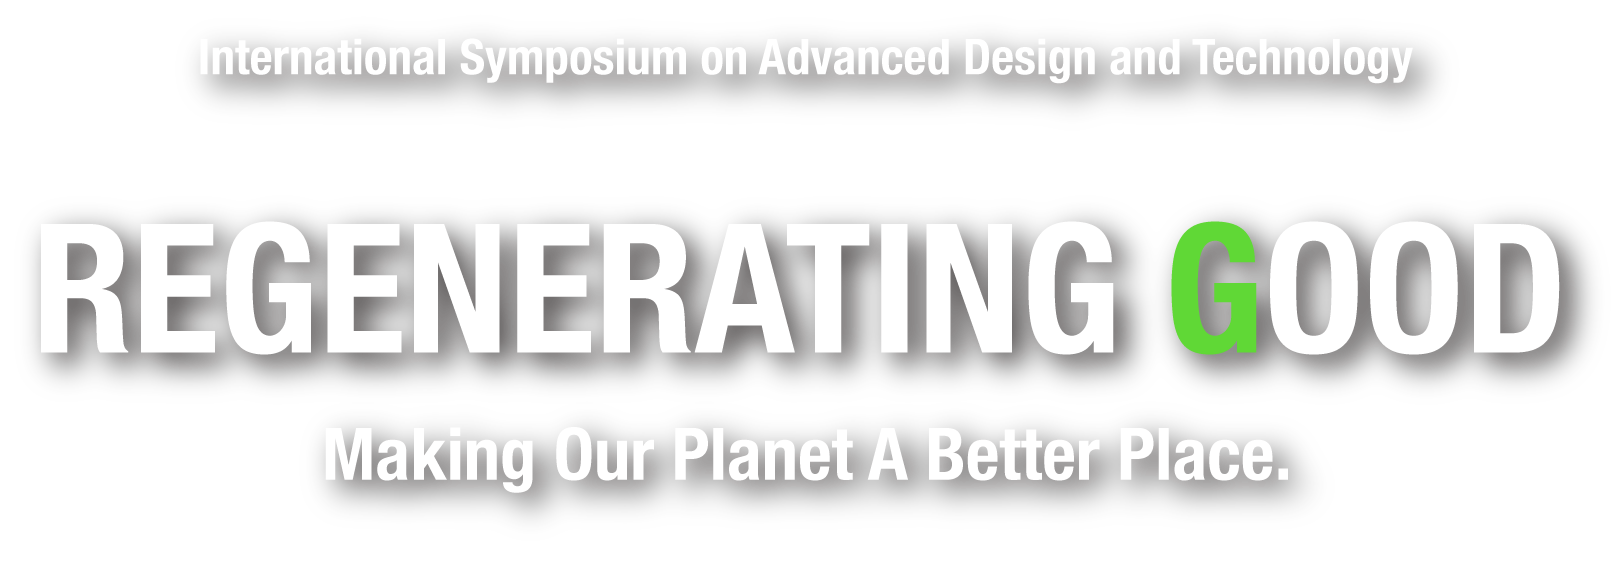 International Symposium on Advanced design and Technology<br />REGENERATING GOOD<br />Making Our Planet A Better Place.